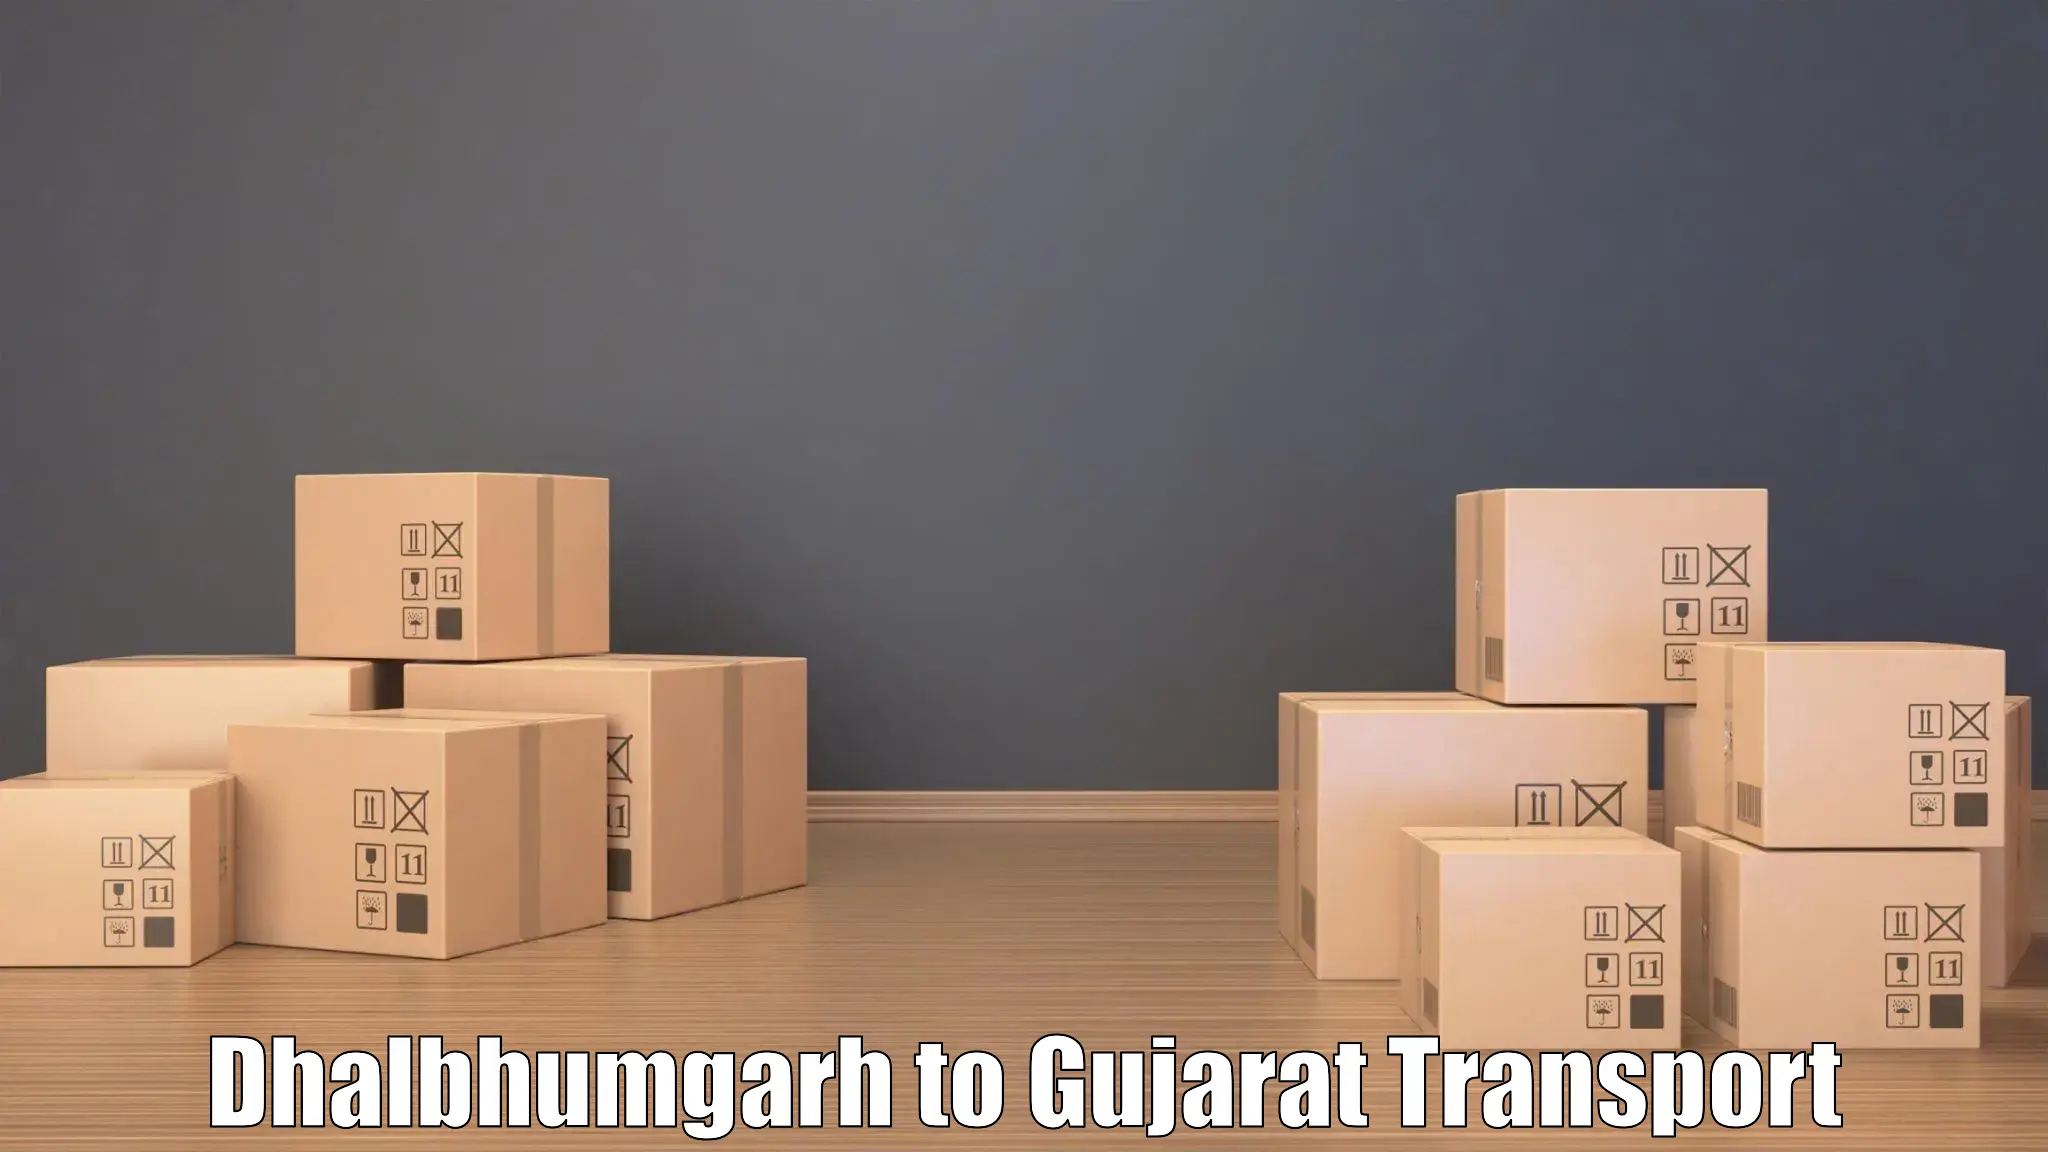 Container transport service Dhalbhumgarh to Bhuj